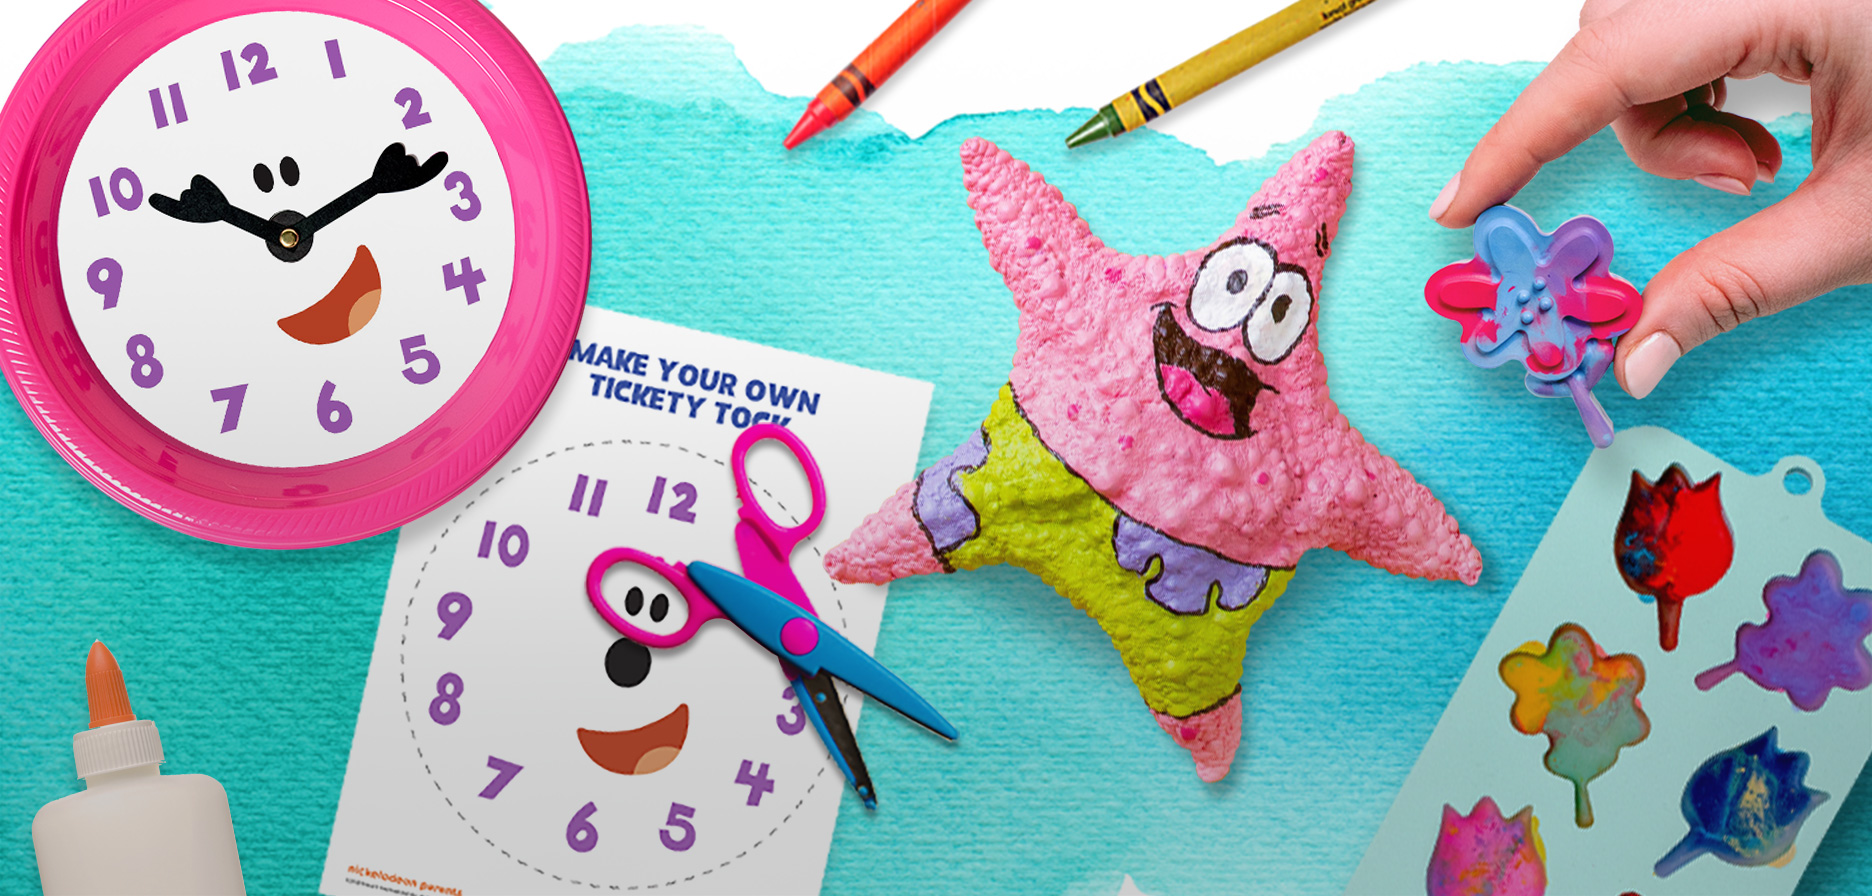 Nickelodeon Parents  Printables, coloring pages, recipes, crafts, and more  from your child's favorite Nickelodeon and Nick Jr. shows.